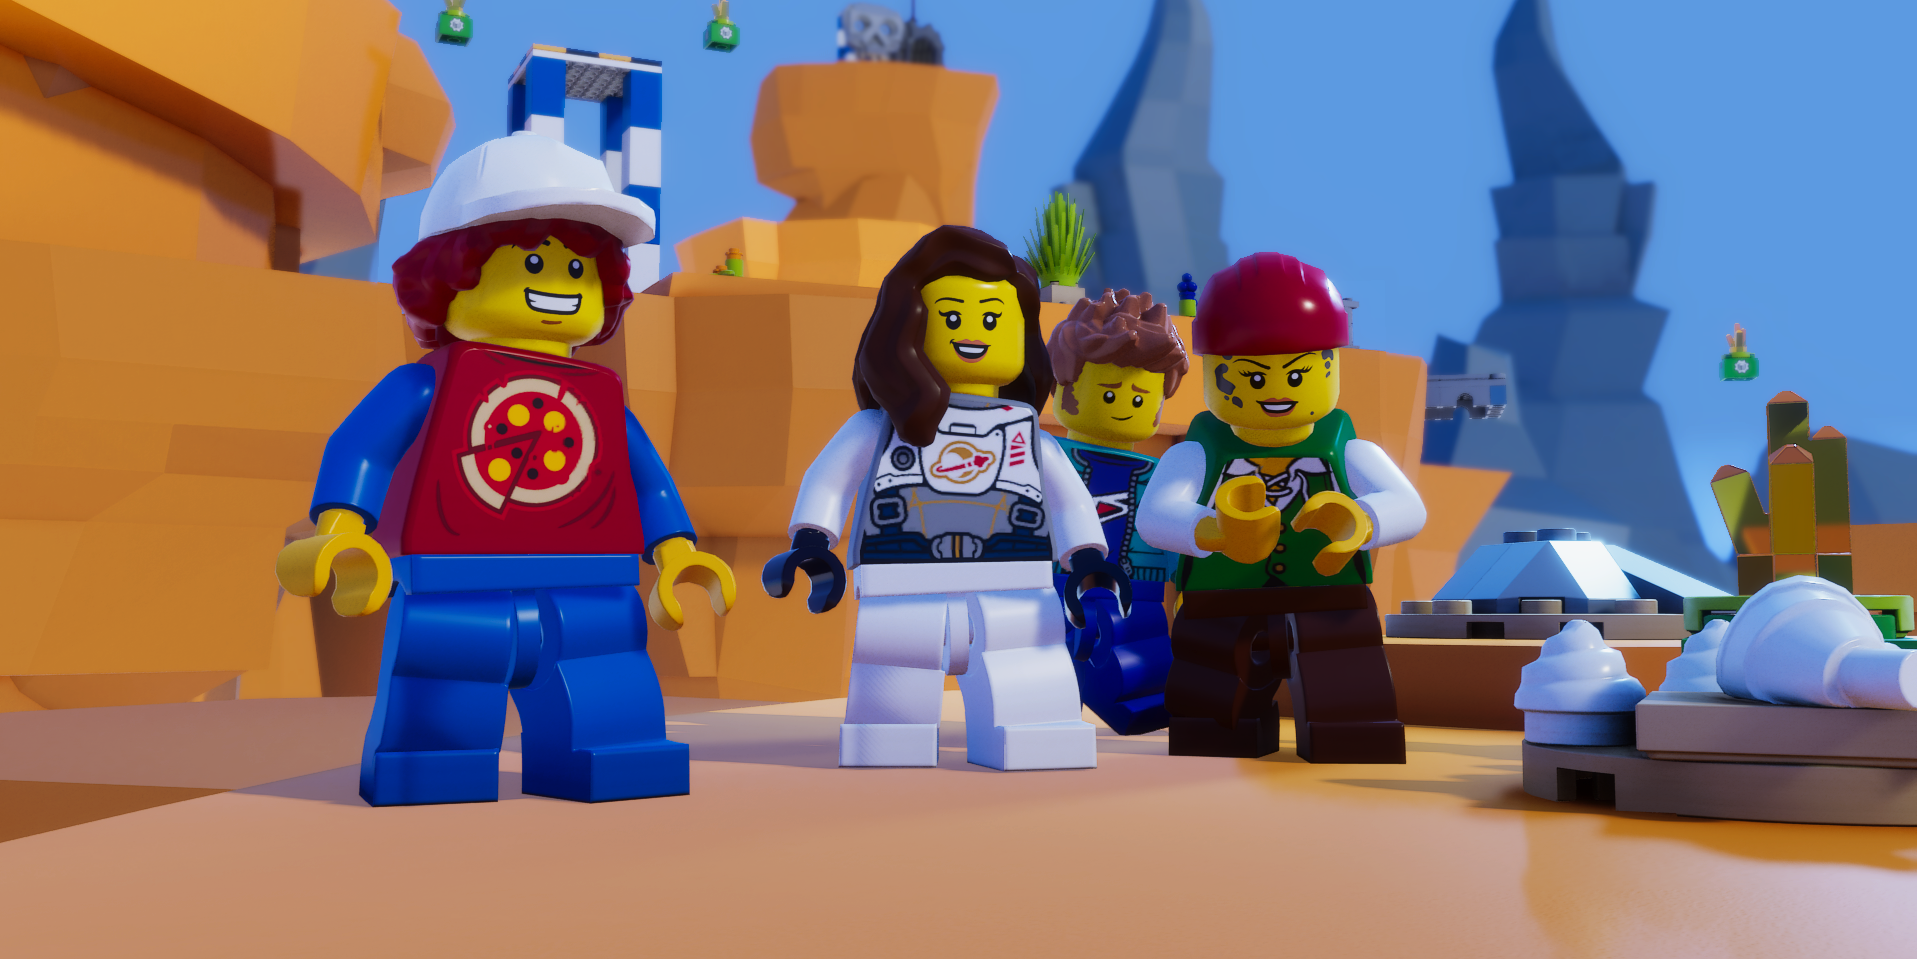 How I want the default designs of some of the characters in LEGO